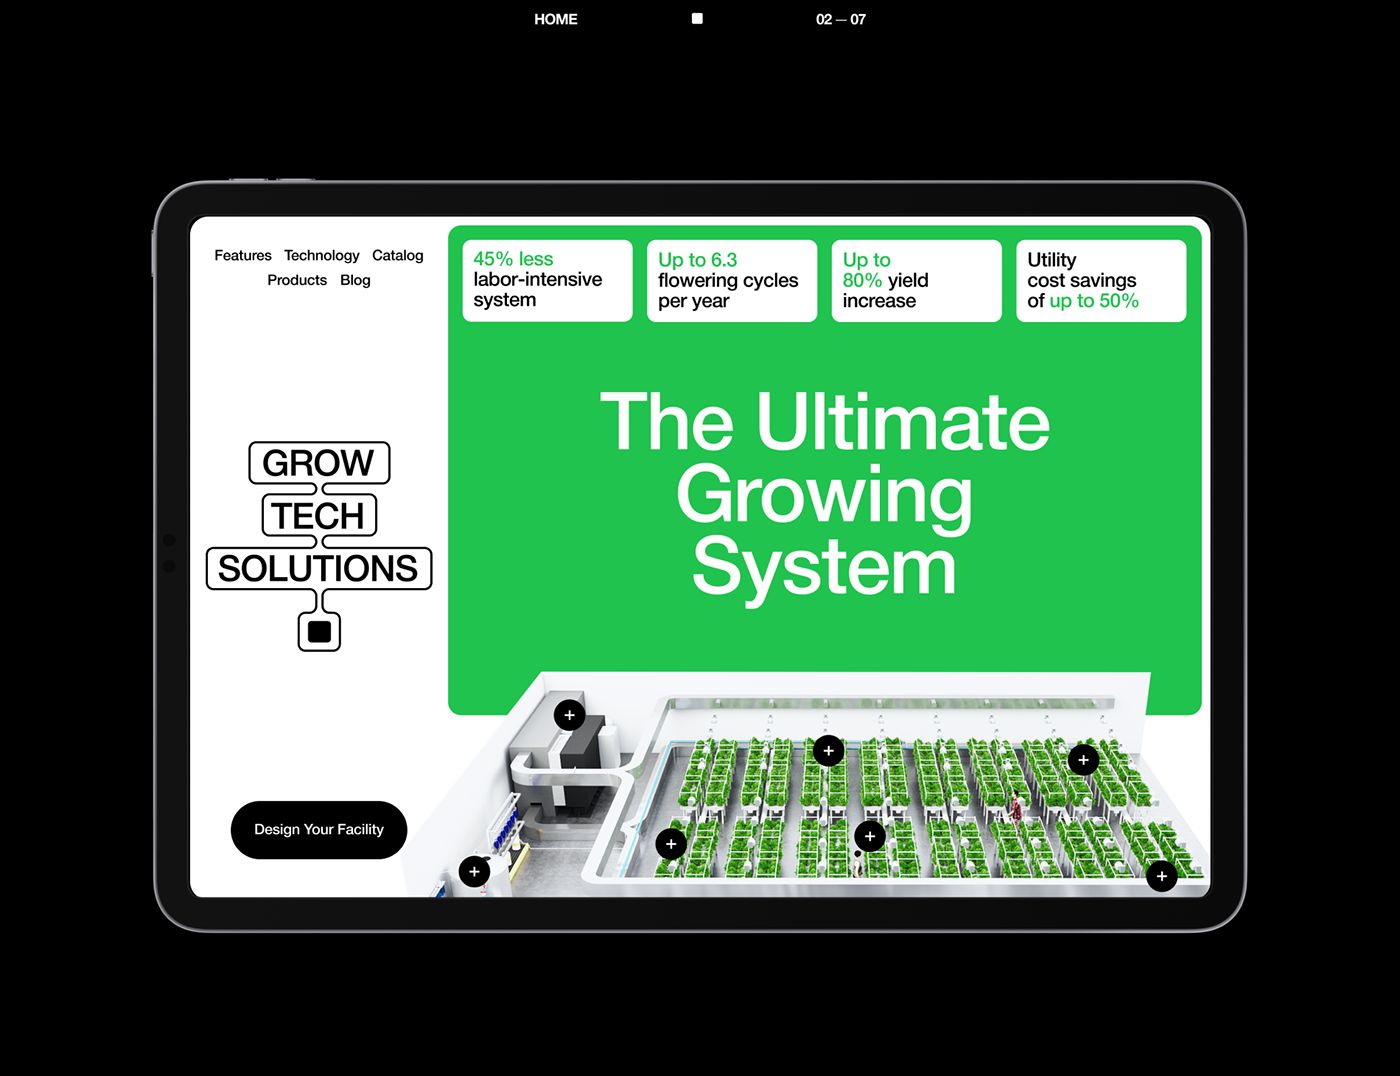 Webflow Technology weed cannabis agriculture helvetica branding  greenhouse Hydroponic farming plants growing